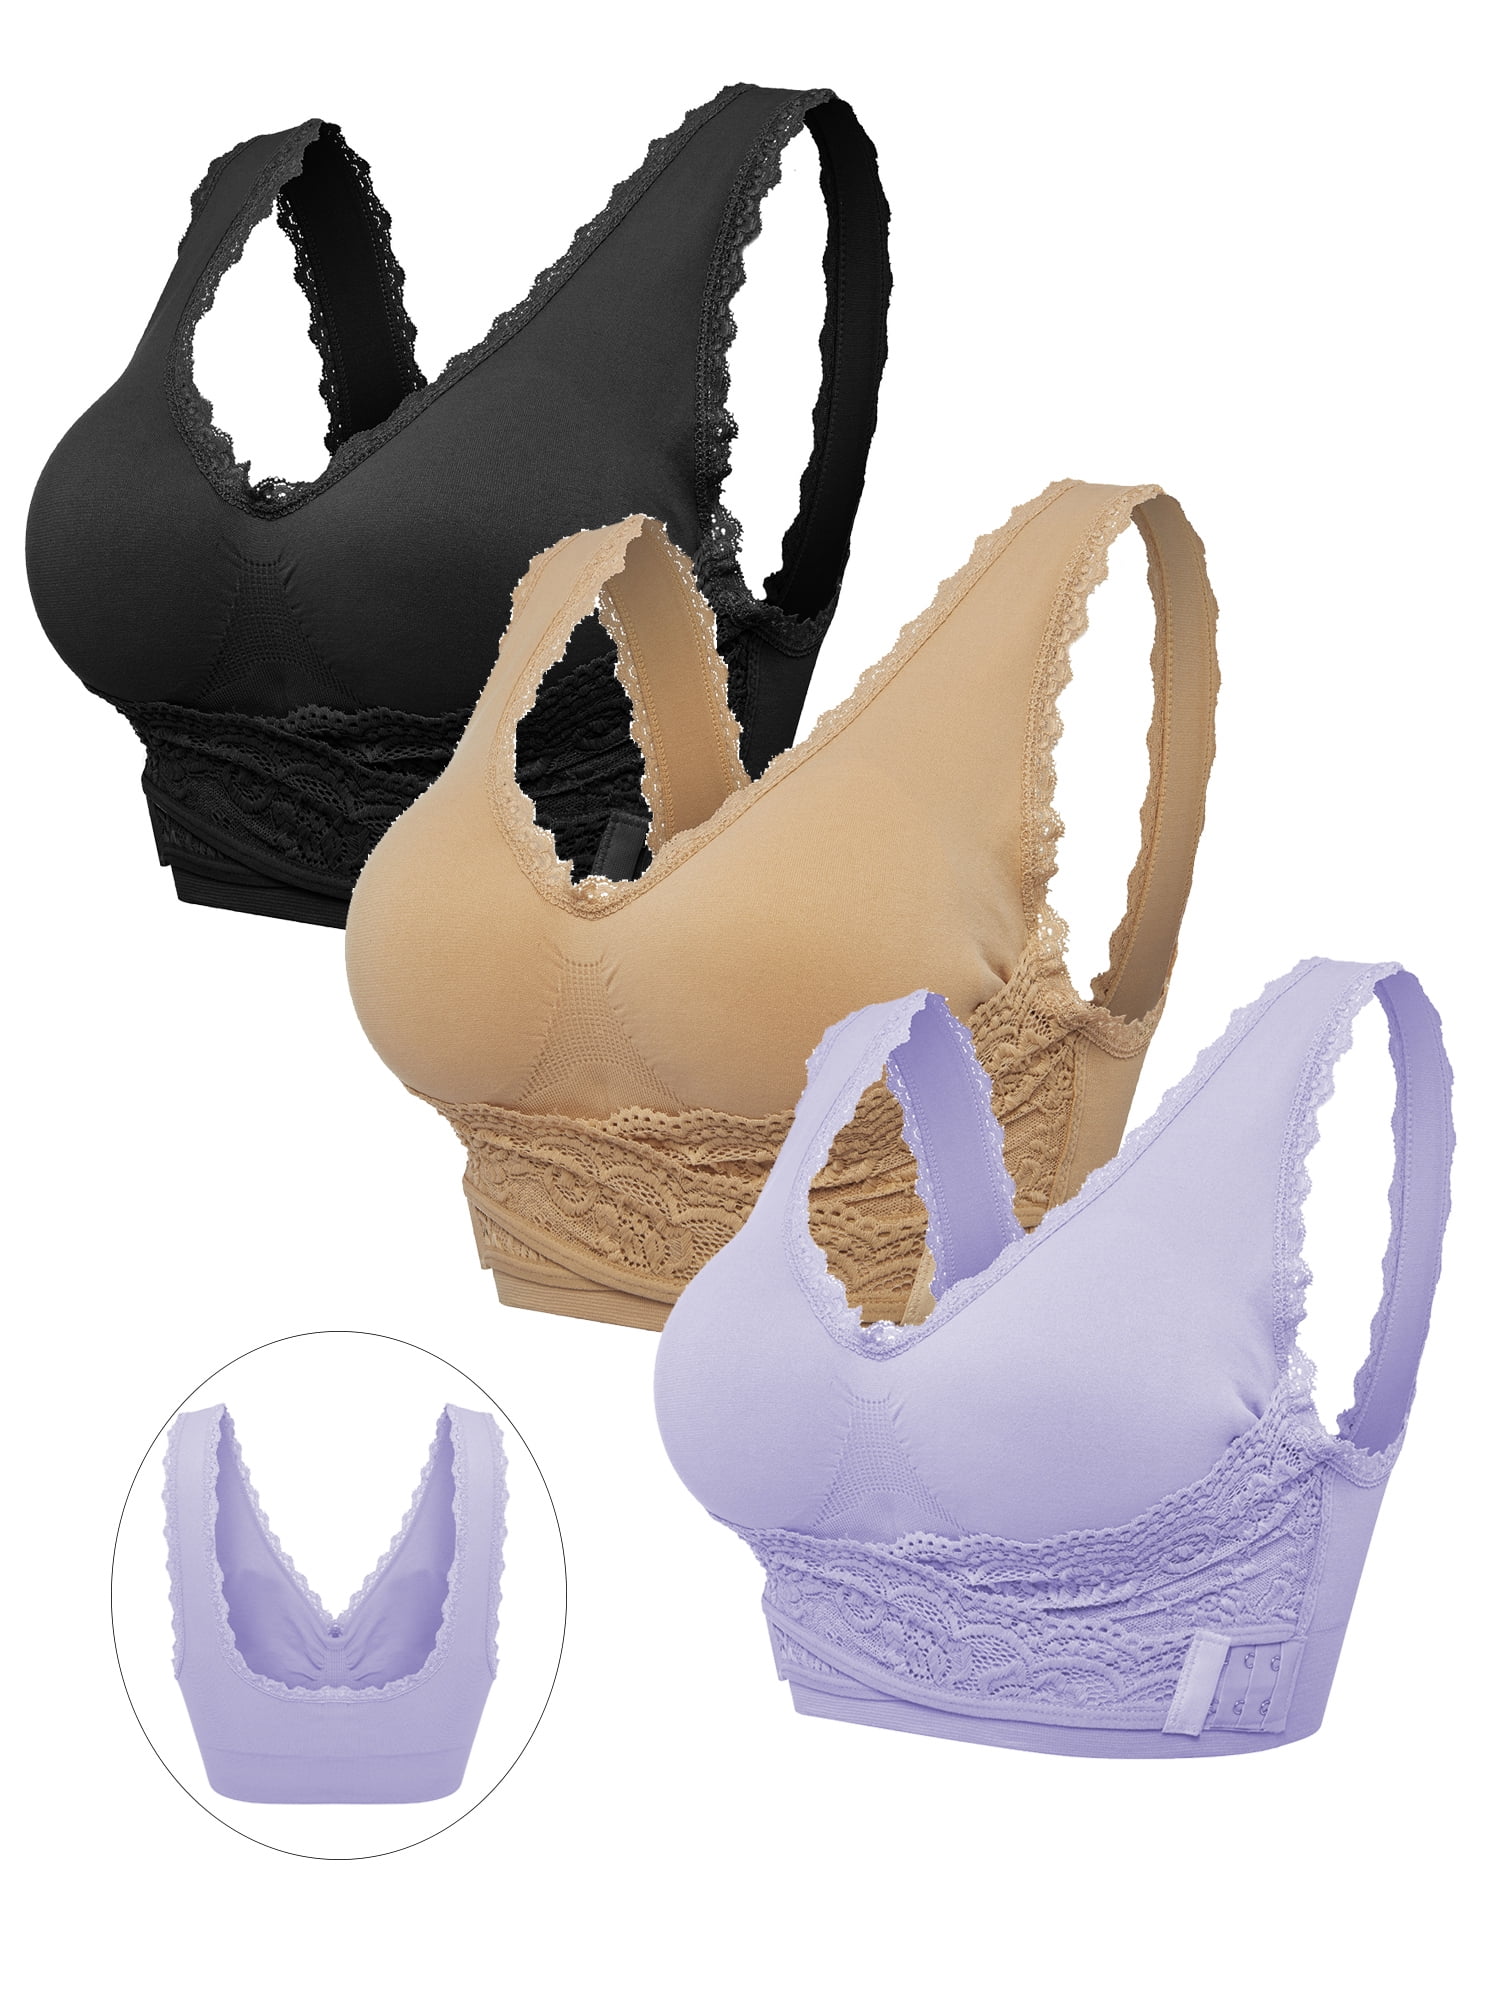  Bras for Women No Underwire 2PC Womens Underwire Super Gather  Sports Bra Front Side Buckle Lace Side Chest (BK1, M) : Ropa, Zapatos y  Joyería